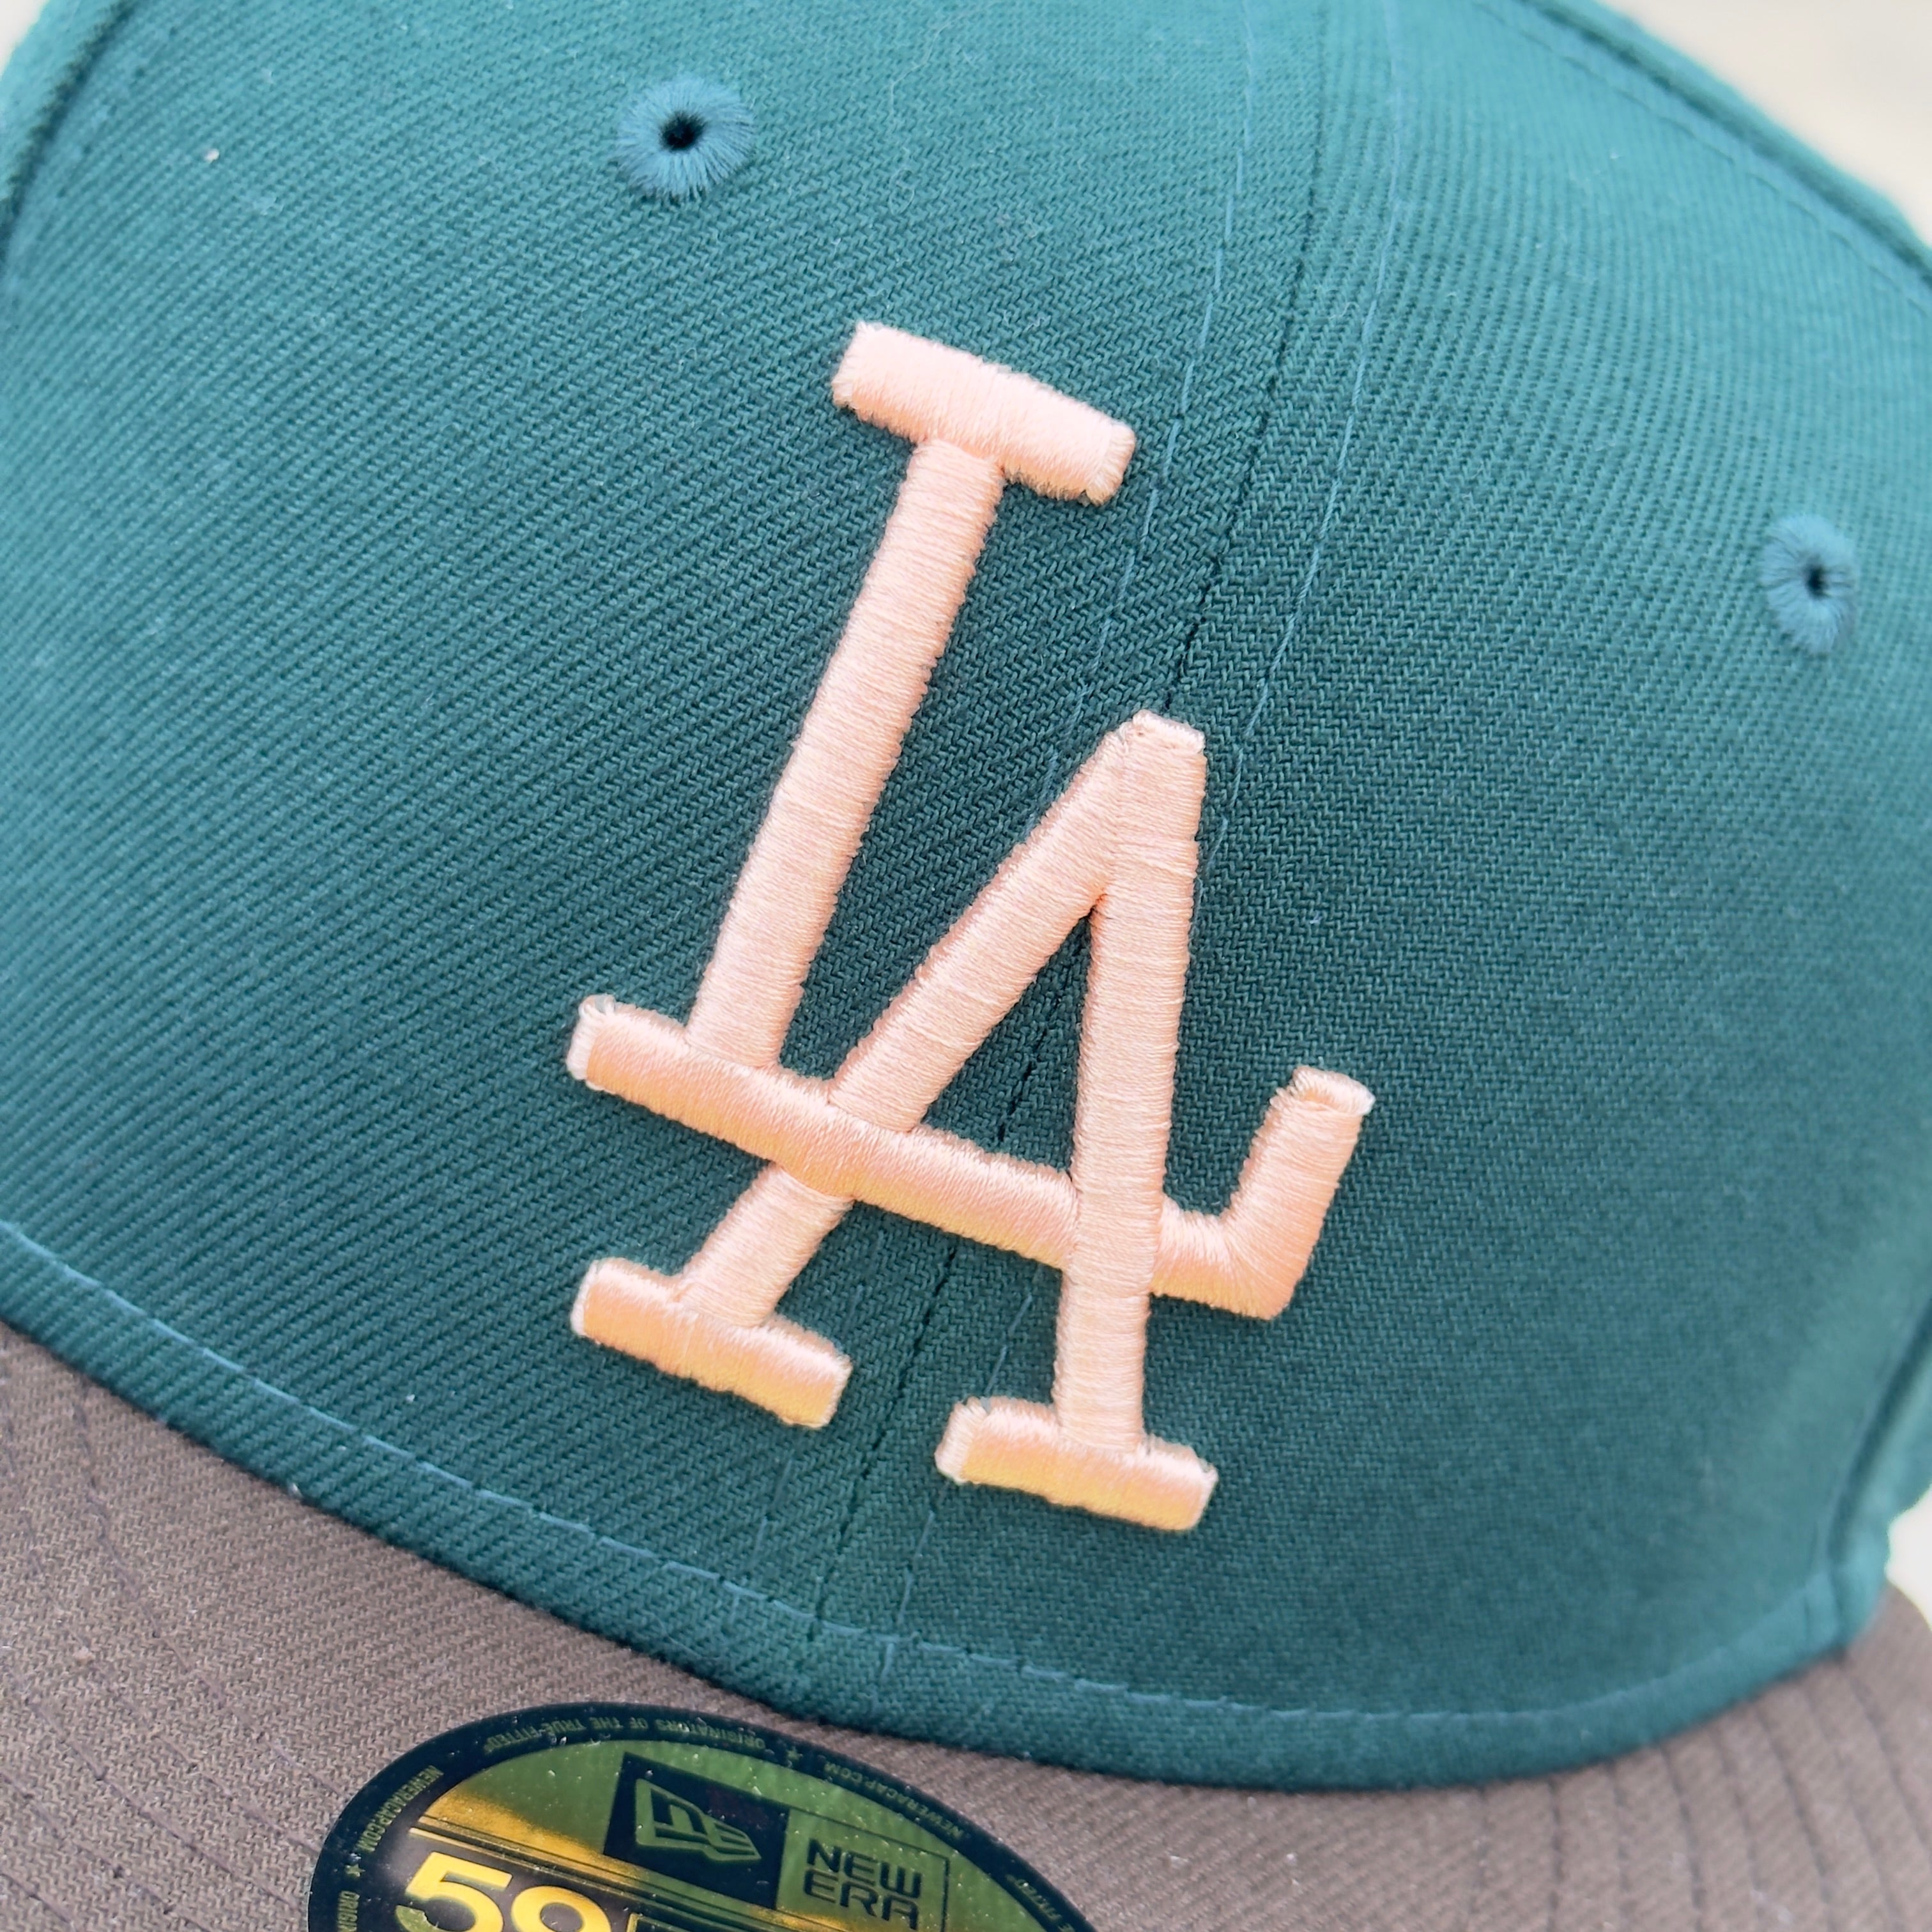 7 1/4 Green Los Angeles Dodgers LA World Series 59fifty New Era Fitted Cap Hat